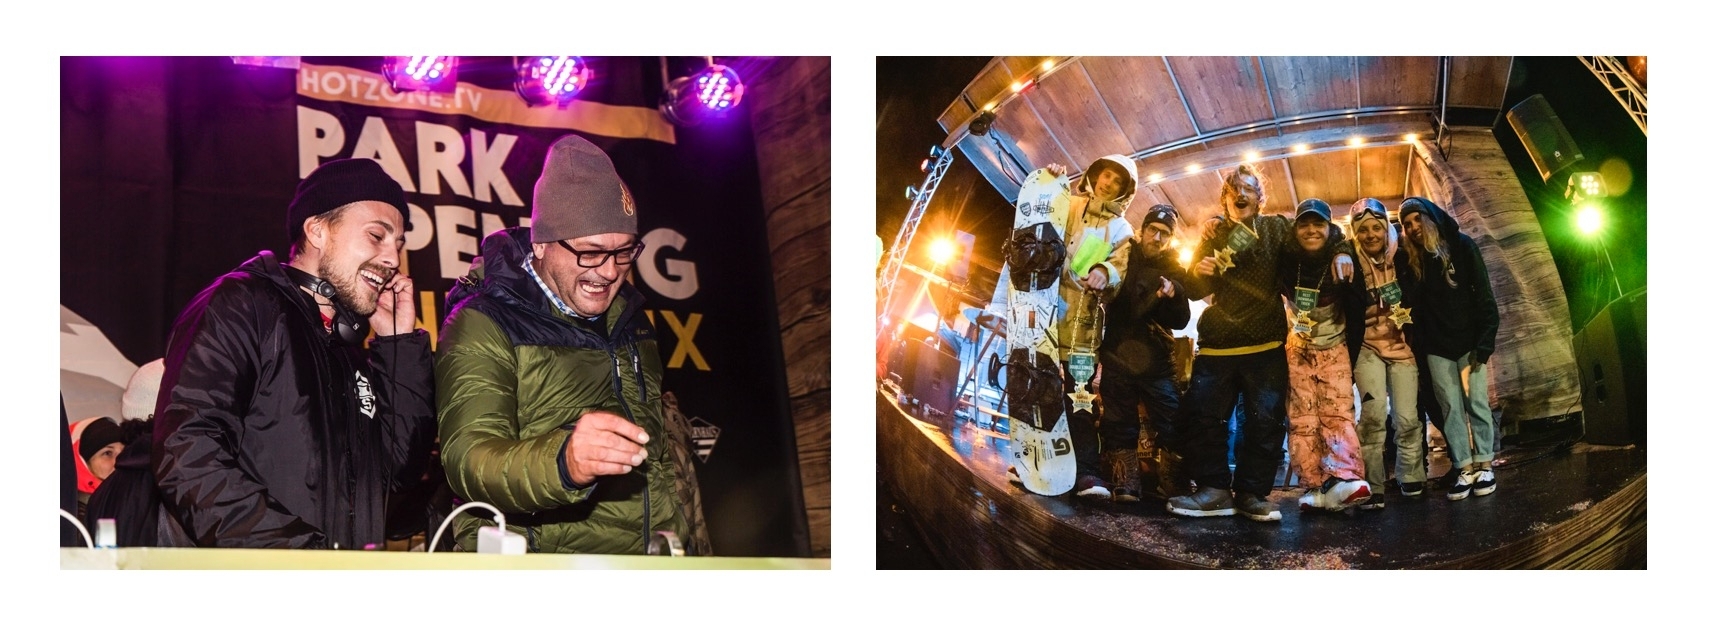 10. Management on the decks with Mad Simon & Podium. Photos by Andreas Monsberger and Fischi.jpg